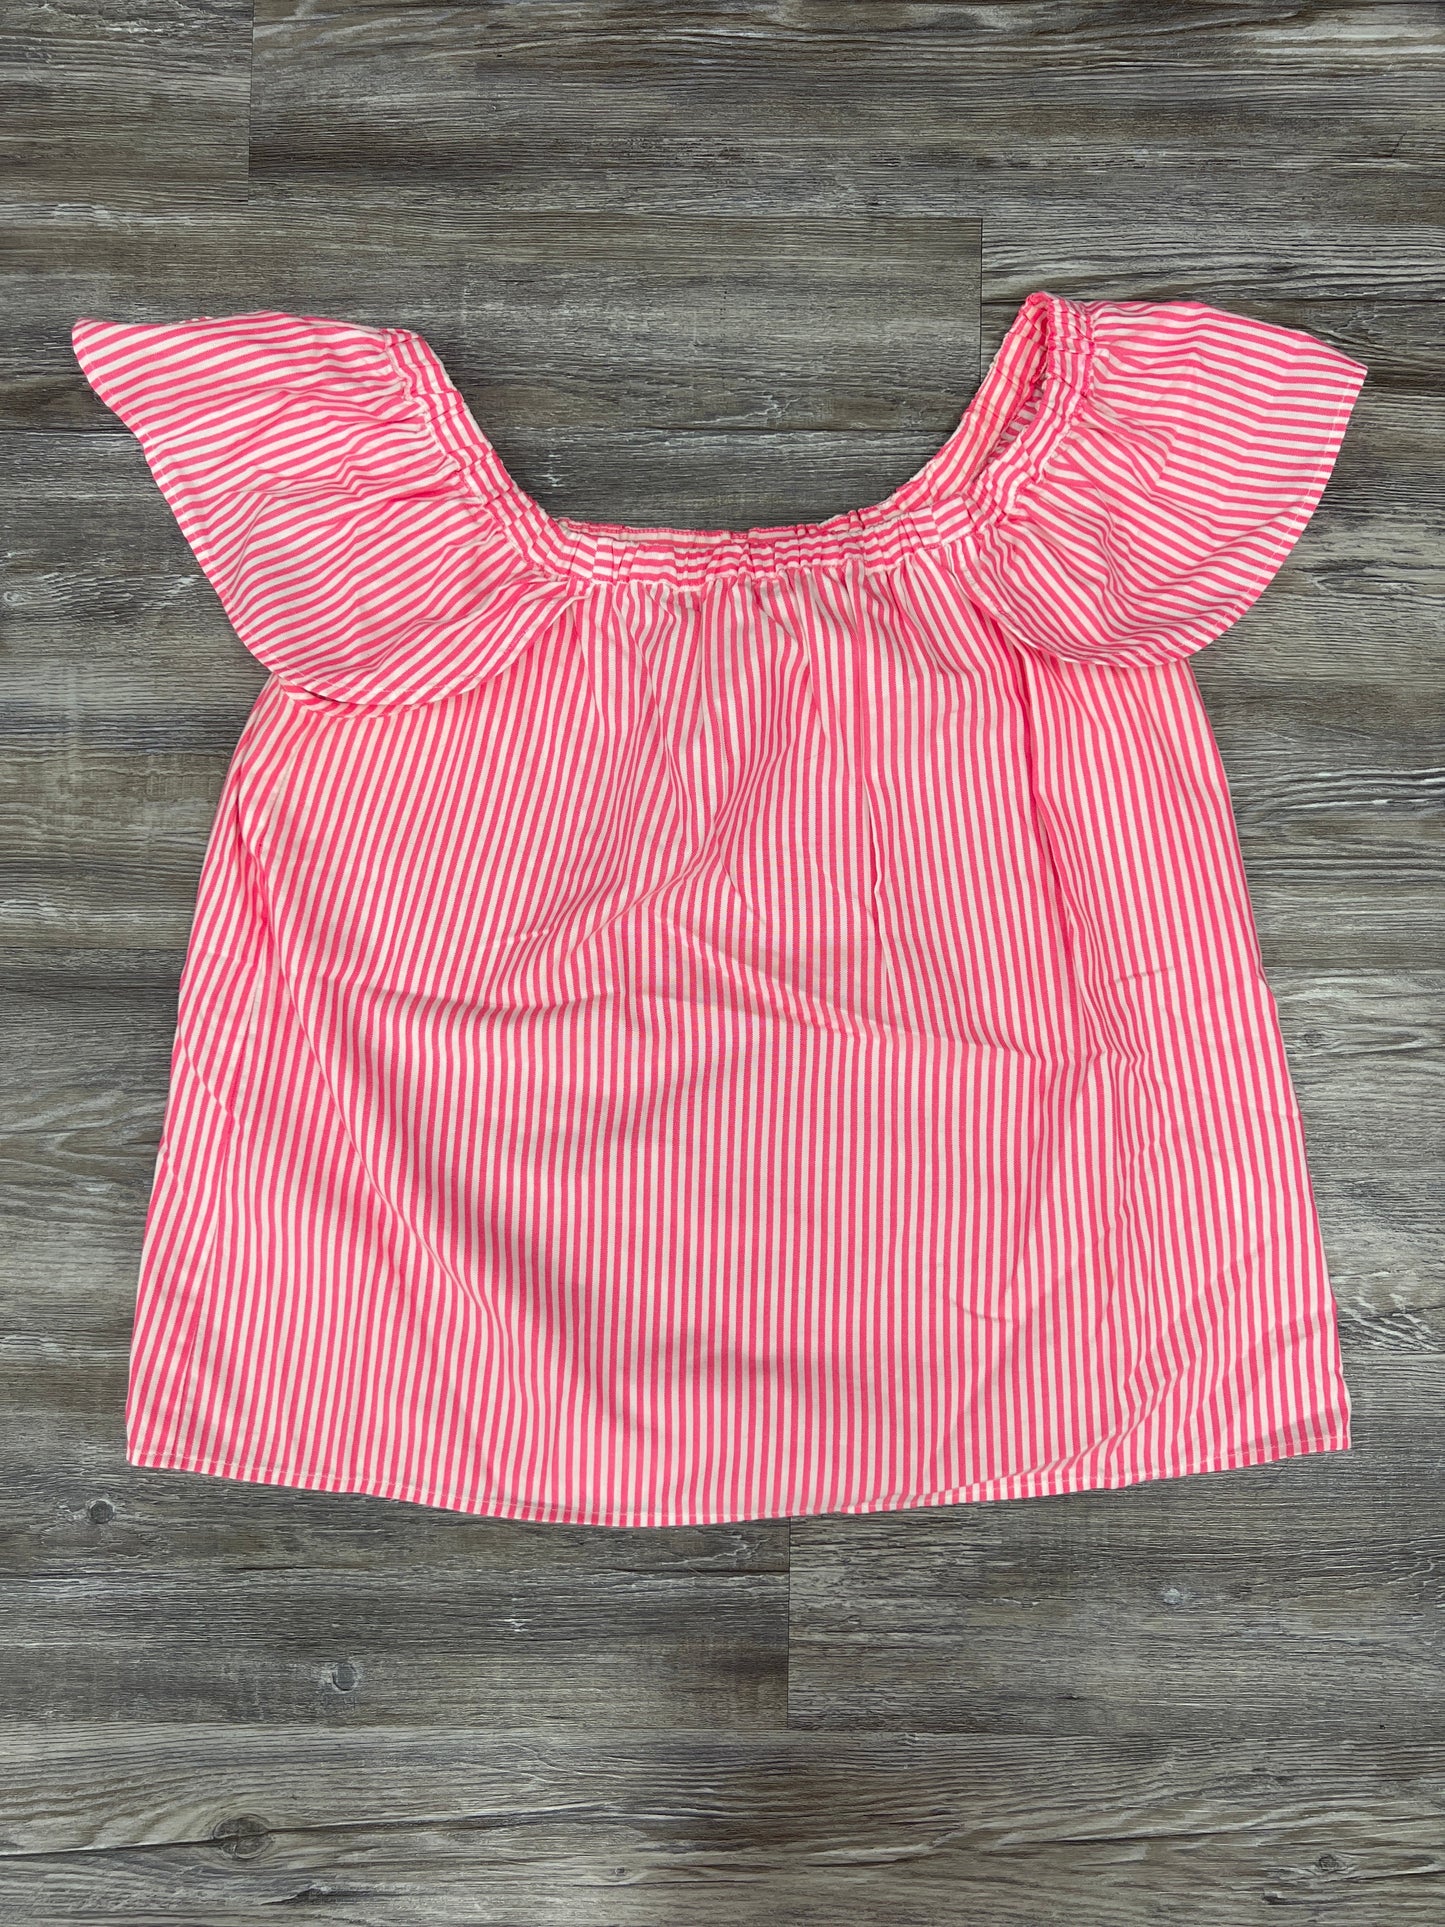 Top Sleeveless By Vineyard Vines Size: M